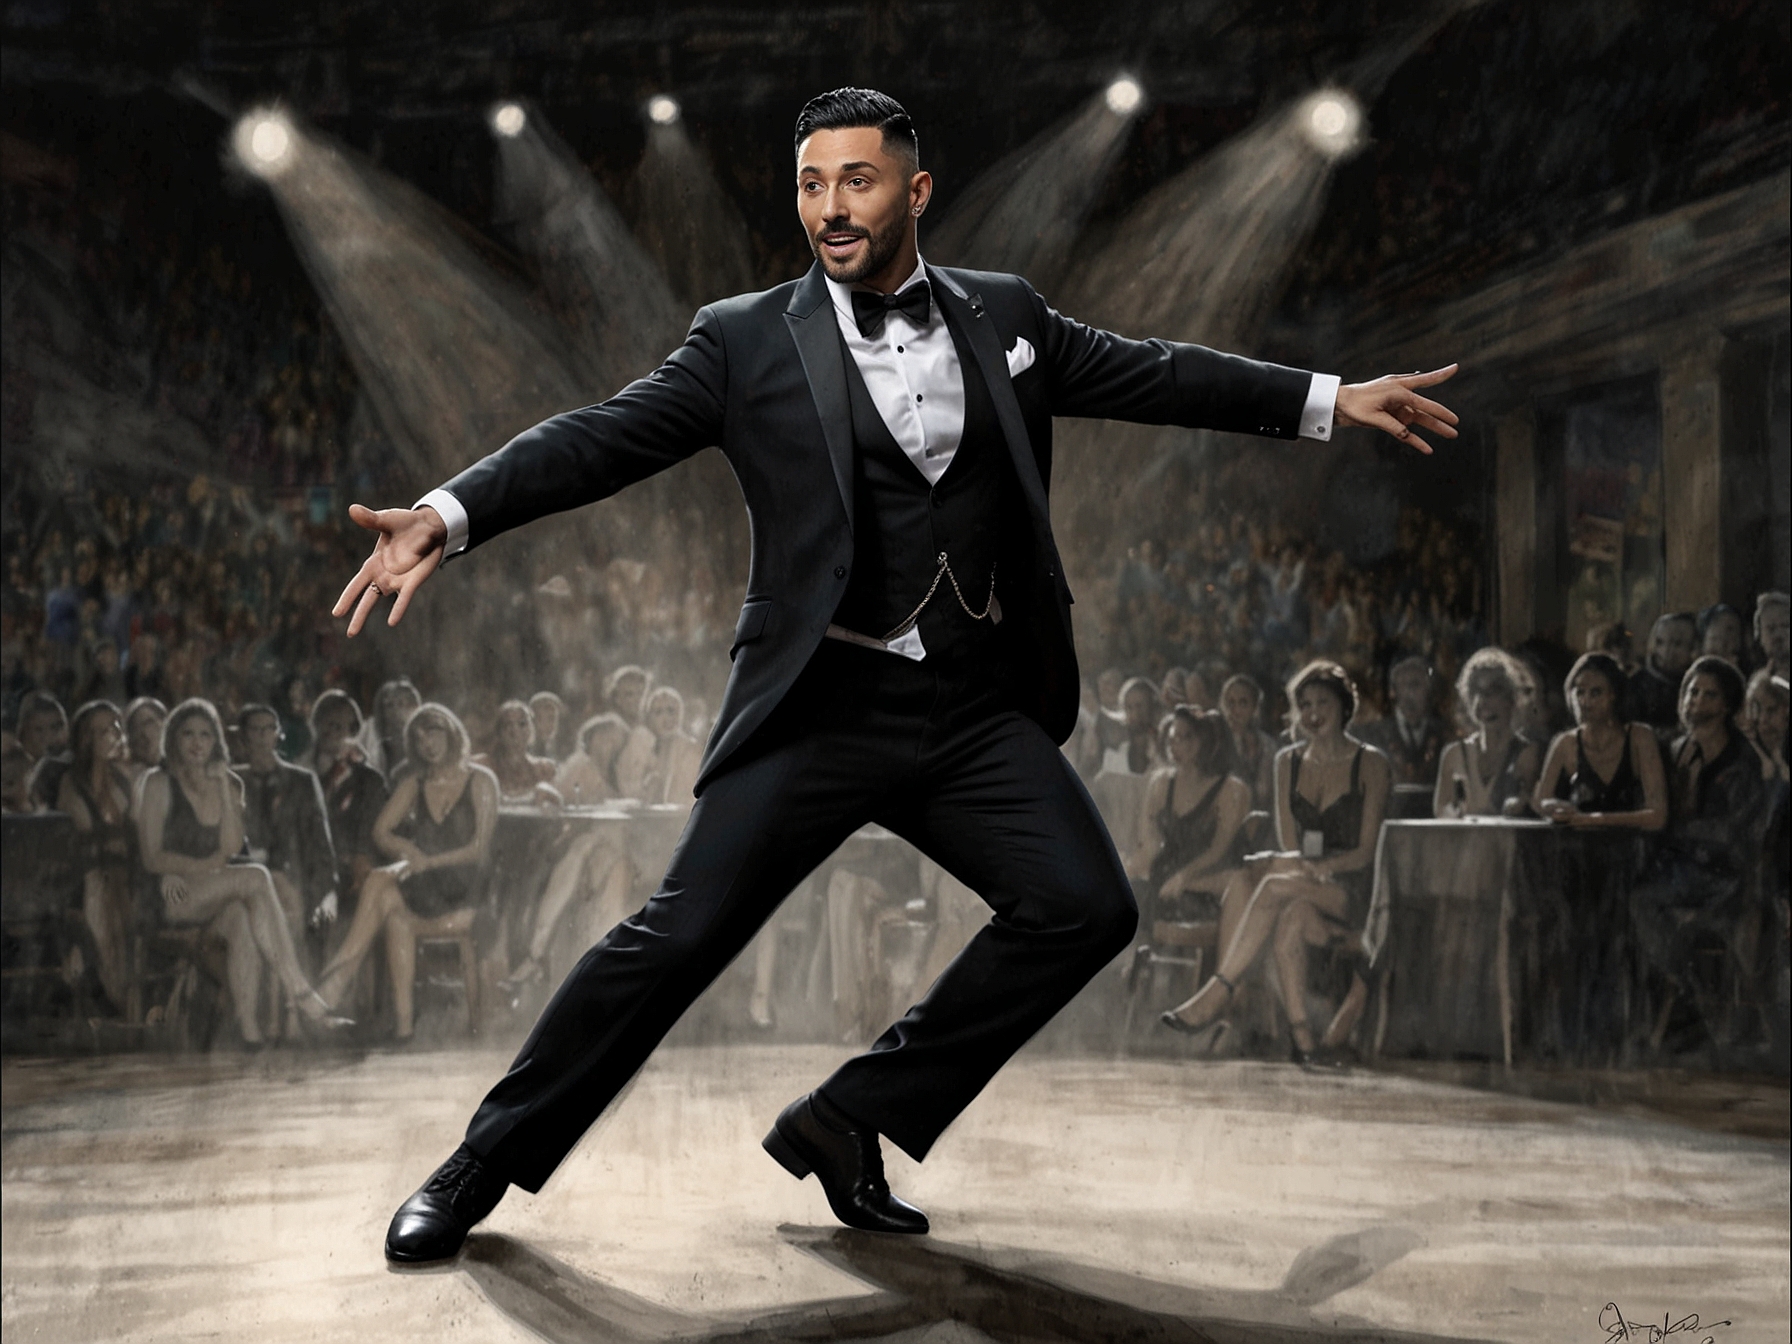 Giovanni Pernice performing on stage with a passionate expression, capturing his dedication to dancing.